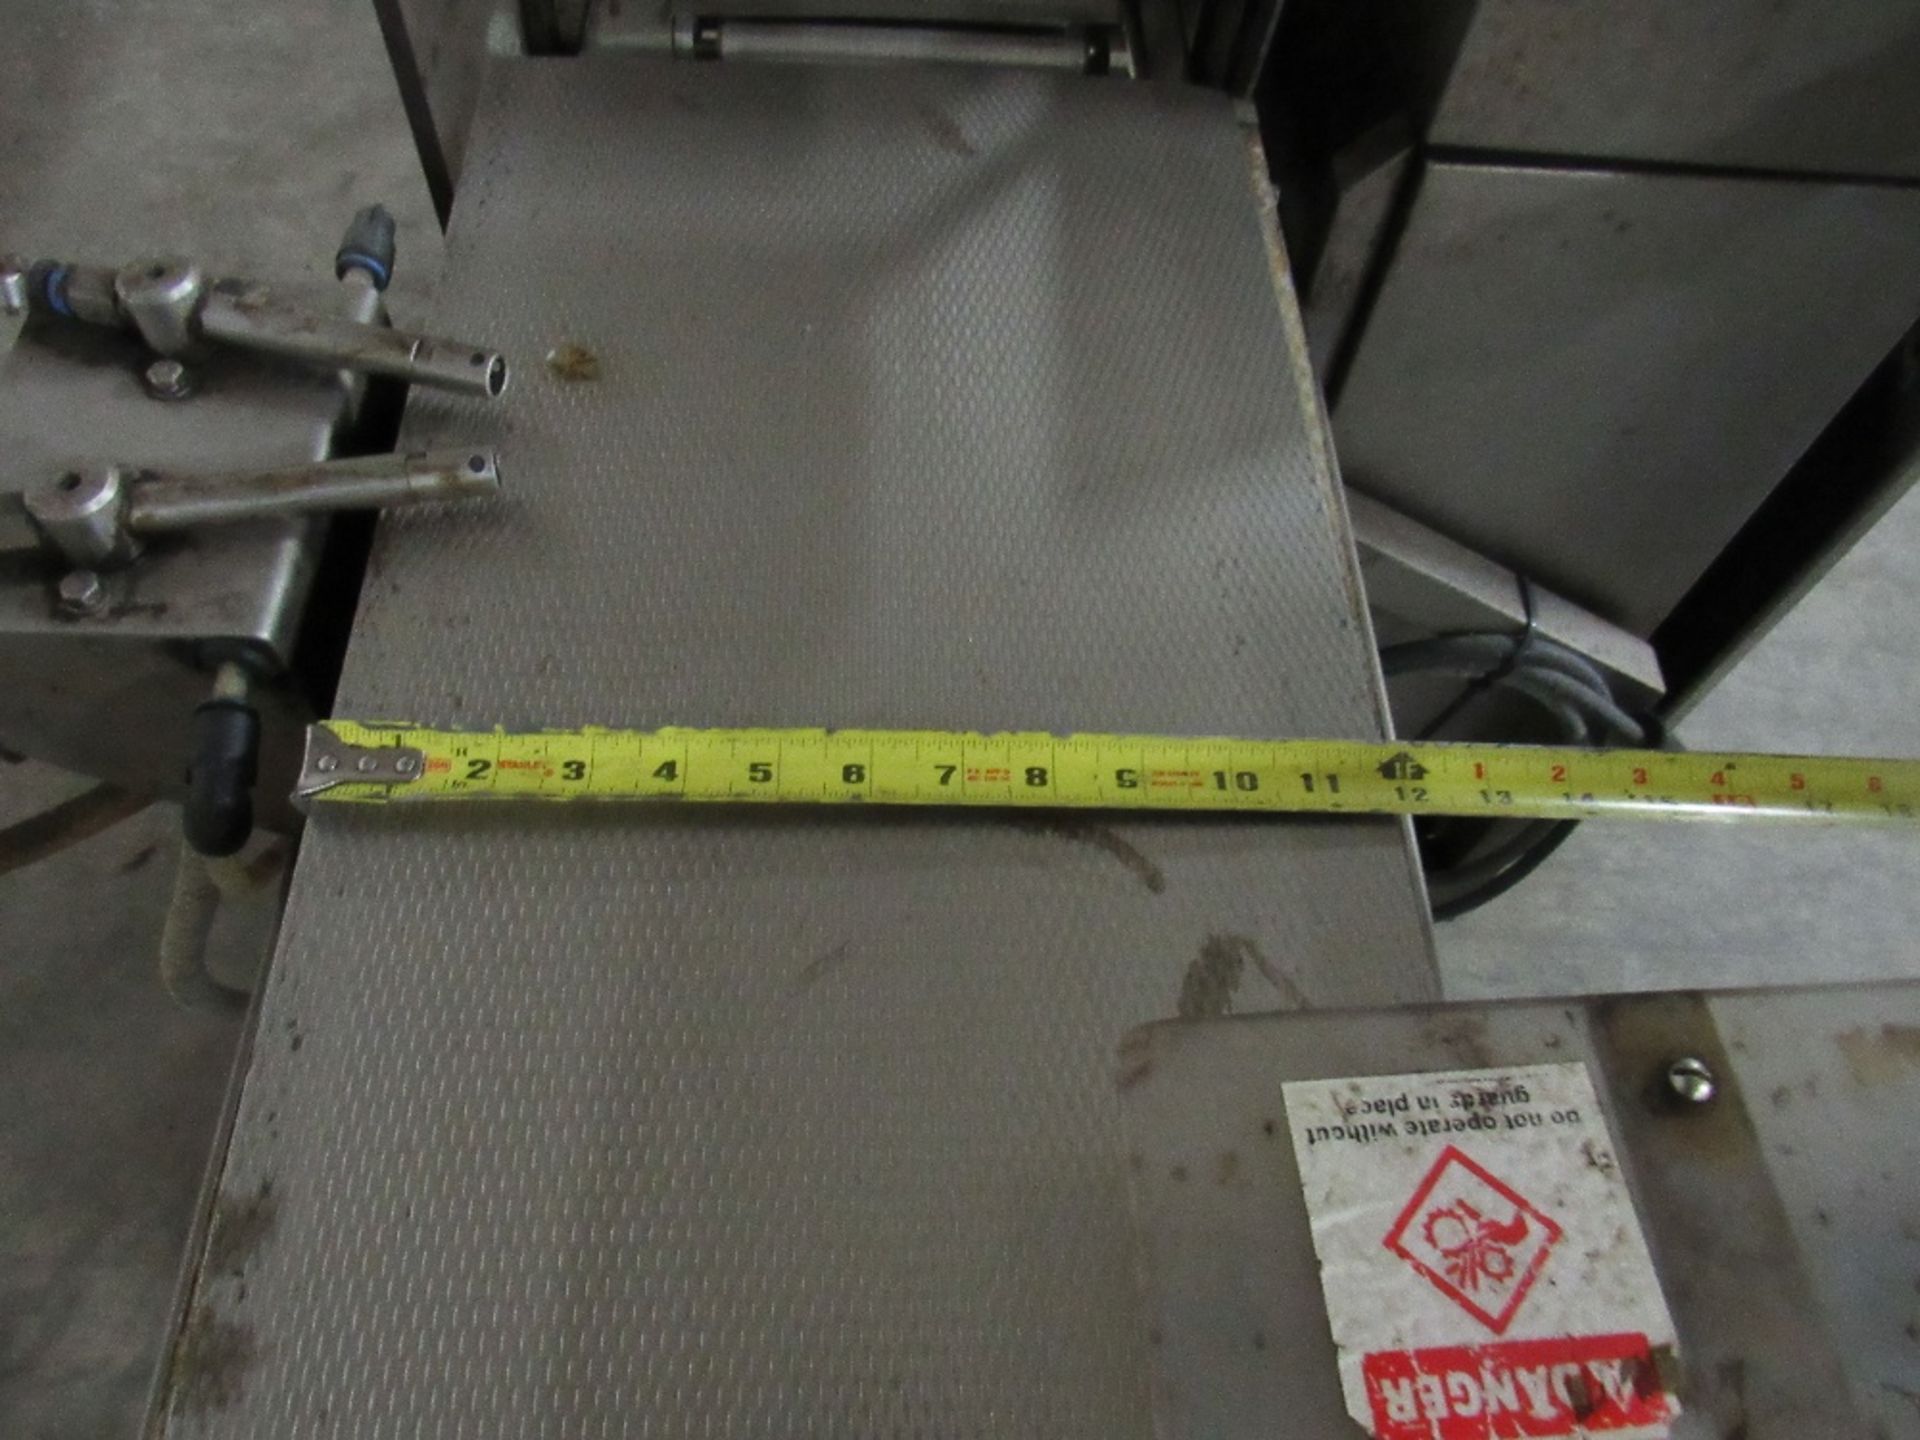 Loma 7000 Staginess Steel Check weigher with built-in 7.5 gallon air tanks and product conveyor - Image 17 of 21